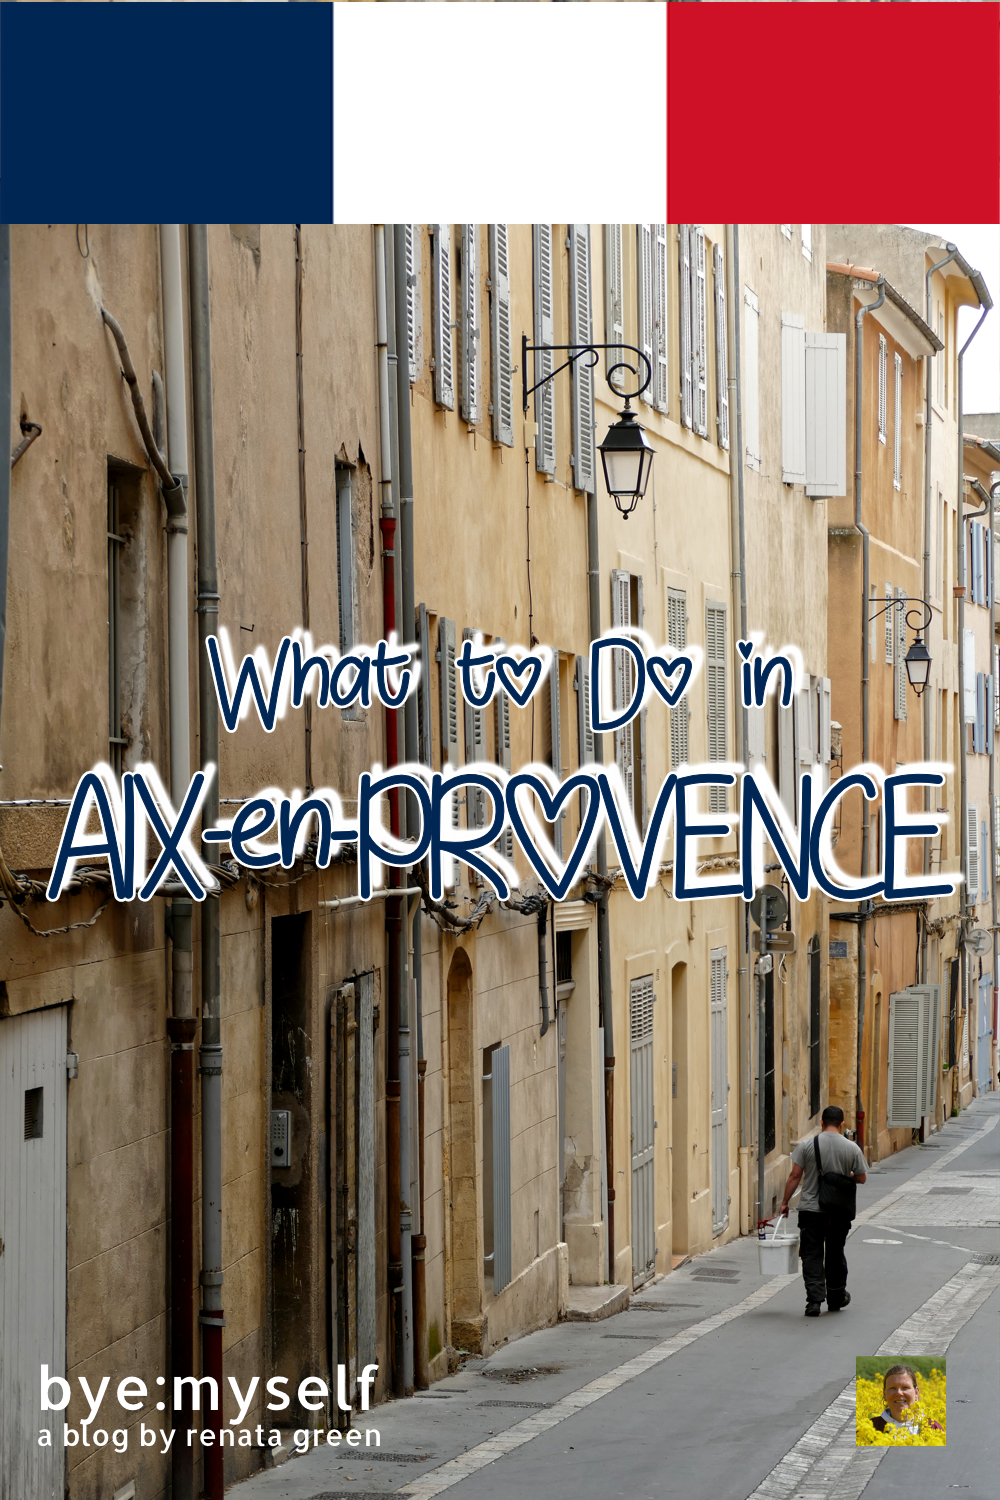 250 fountains, countless hot springs and and 300 days of sunshine a year. Bouillabaisse and ratatouille, Calisson and local wine - in this post, I'll show you what to do in Aix-en-Provence, one of France's most exquisite cities. #aixenprovence #provence #france #europe #art #cezanne #paulcezanne #citytrip #weekendtrip #travel #byemyself